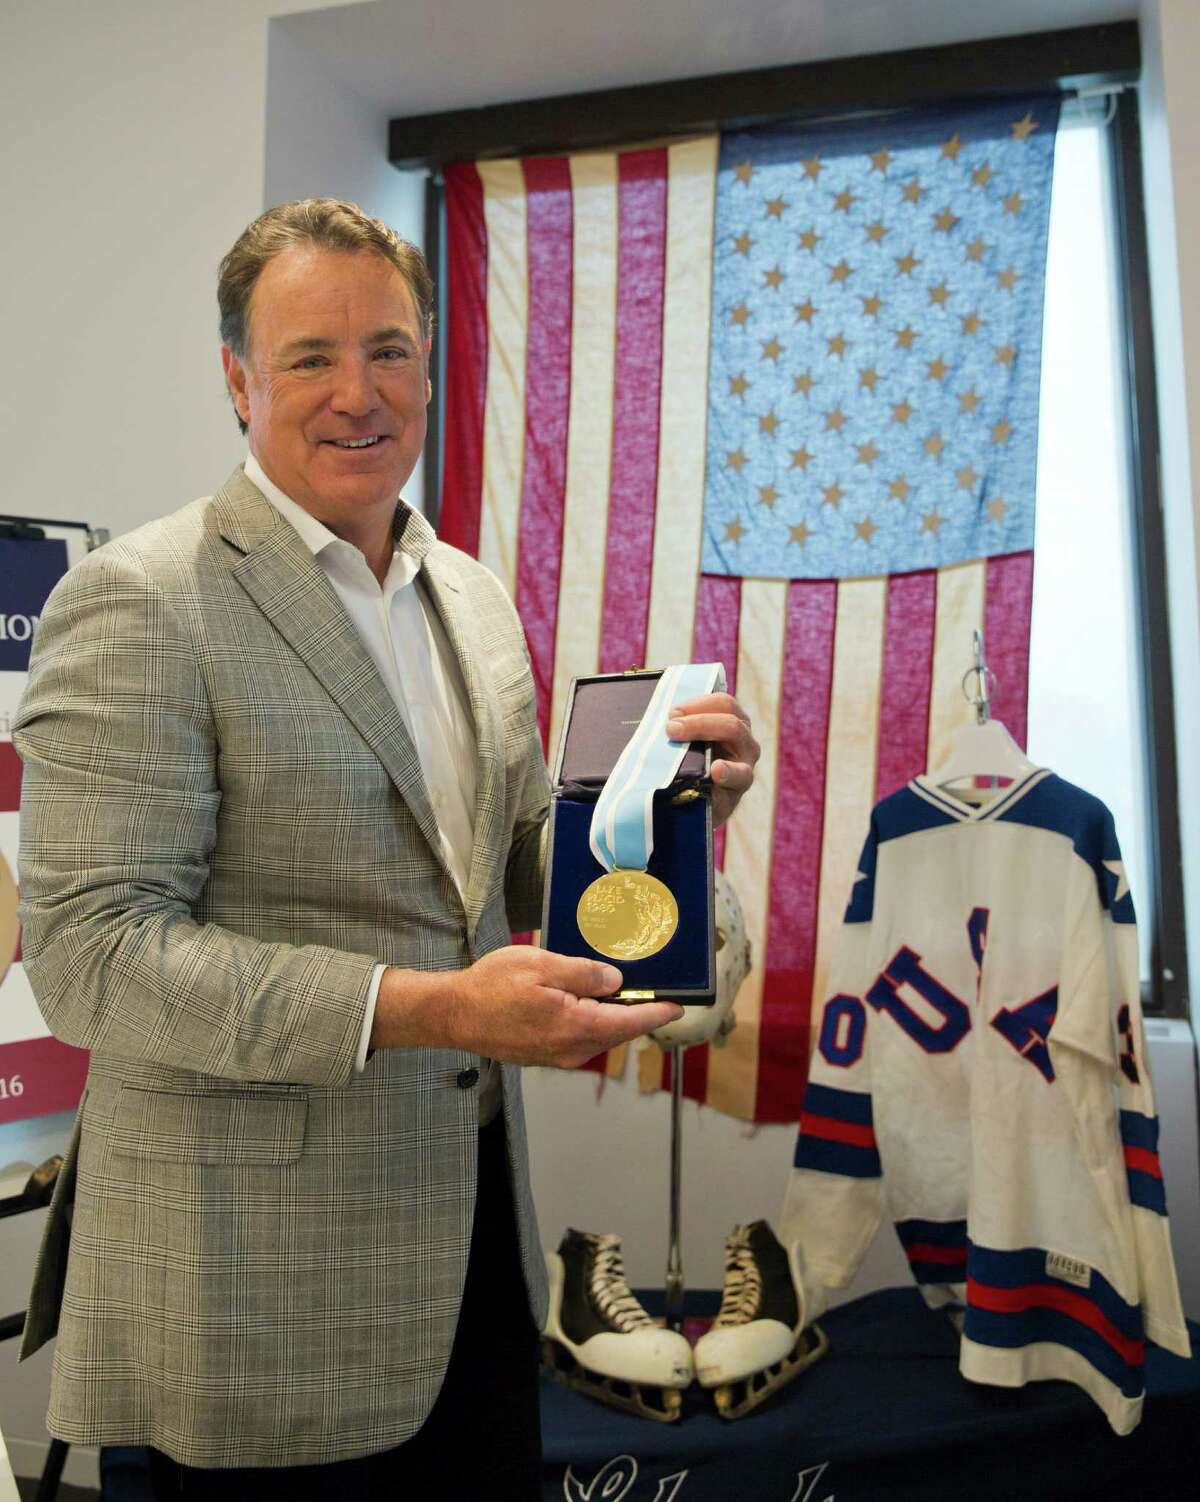 Jim Craig, the hockey goaltender who helped the U.S. win a miraculous gold medal at the 1980 winter Olympics, is framed by a display featuring the jerseys, skates and goalie equipment he wore in the Soviet and Finland games as well as the iconic American flag that was draped over his shoulders after the gold medal win, as he poses for a photo with the his Olympic Gold medal, Tuesday, May 24, 2016, in New York. Craig is now auctioning off the items. (AP Photo/Mary Altaffer) ORG XMIT: NYMA102